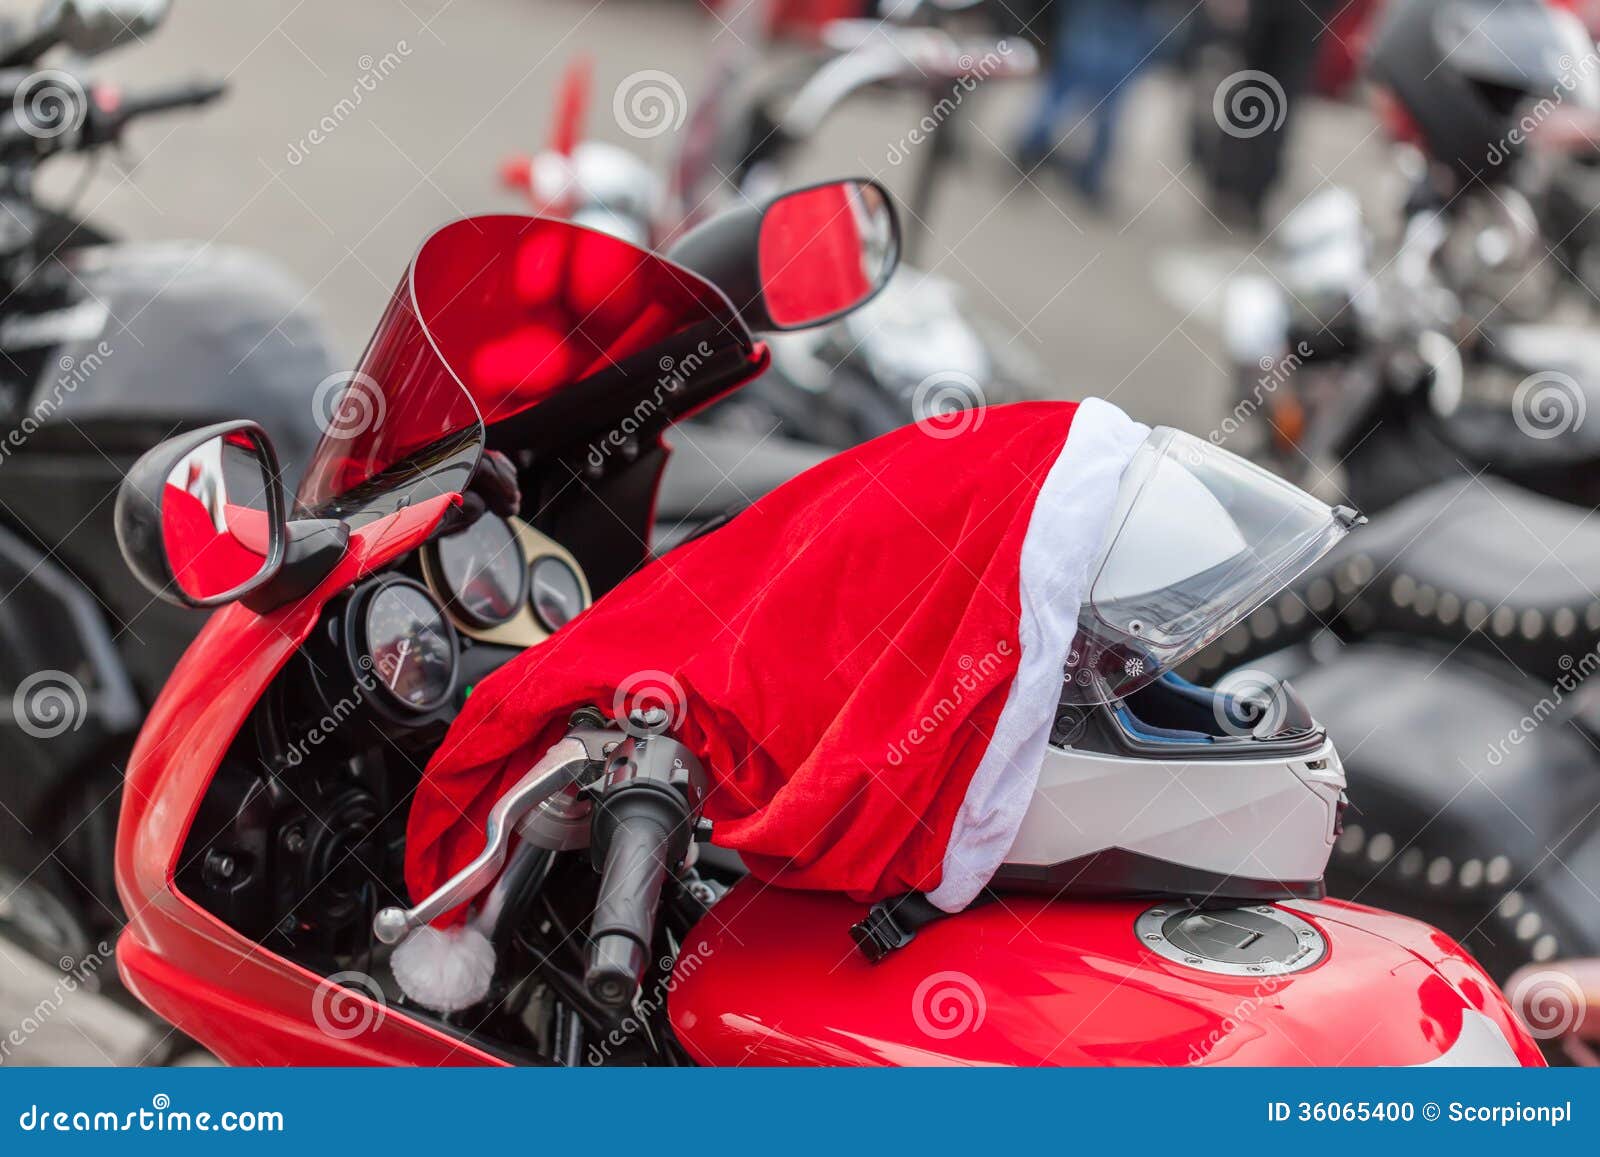 Motorcycle of Santa Claus stock photo. Image of element - 36065400